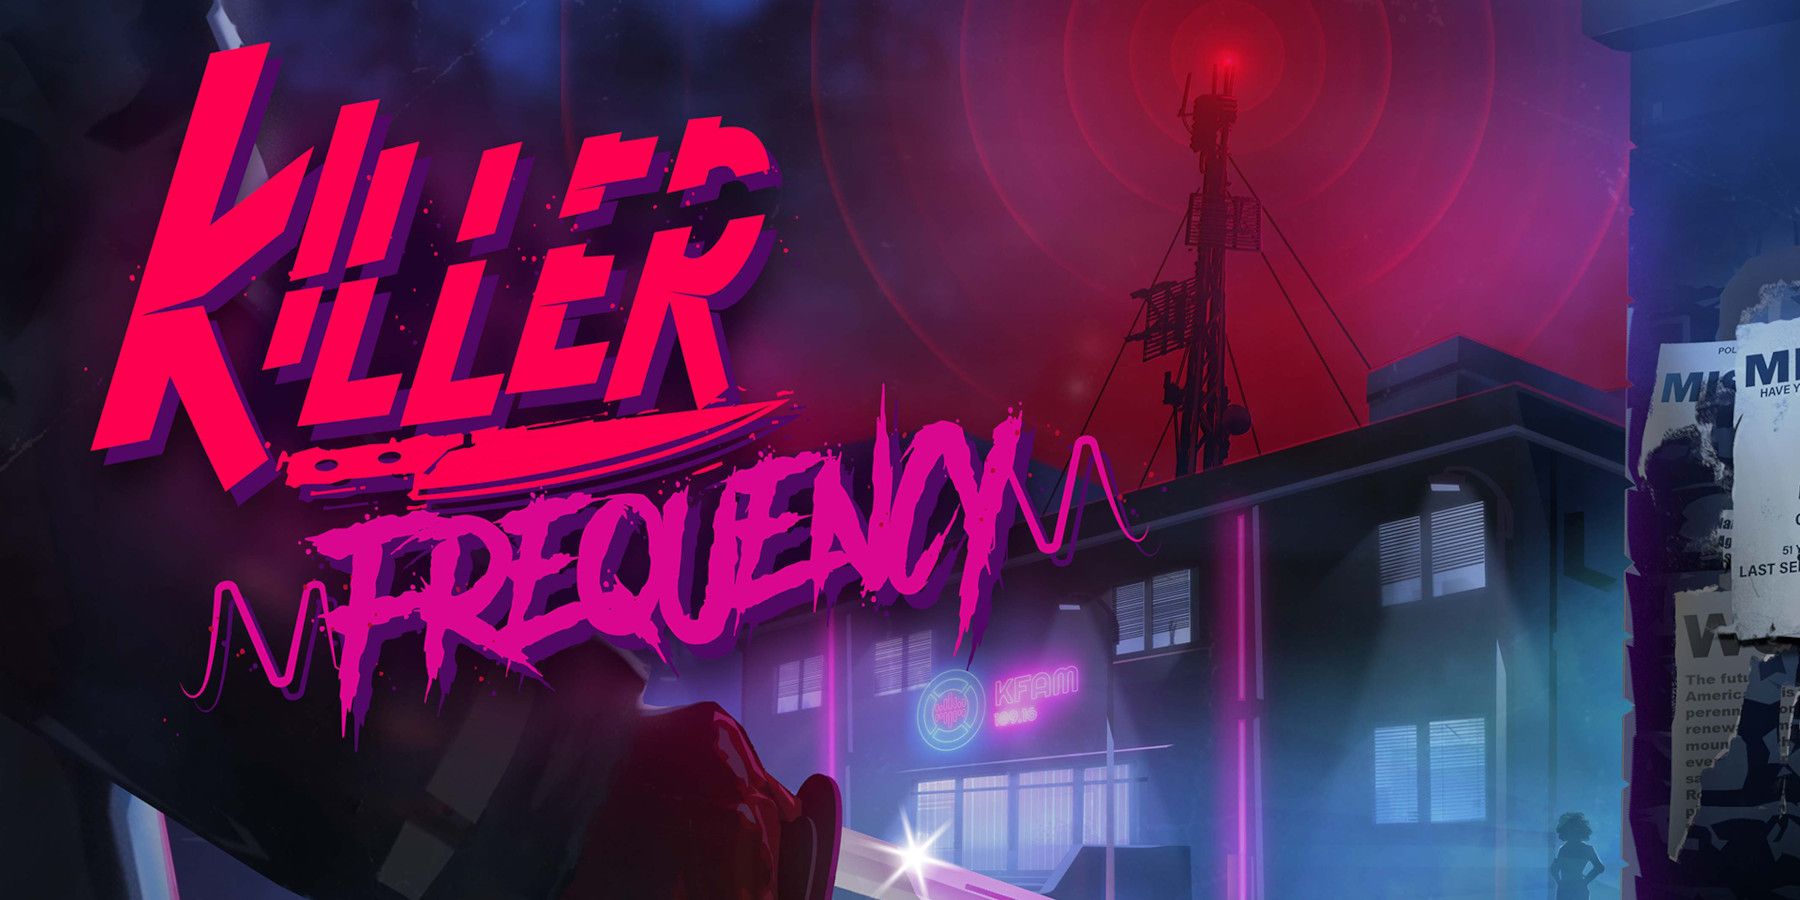 Artwork for the game Killer Frequency. Text reads 